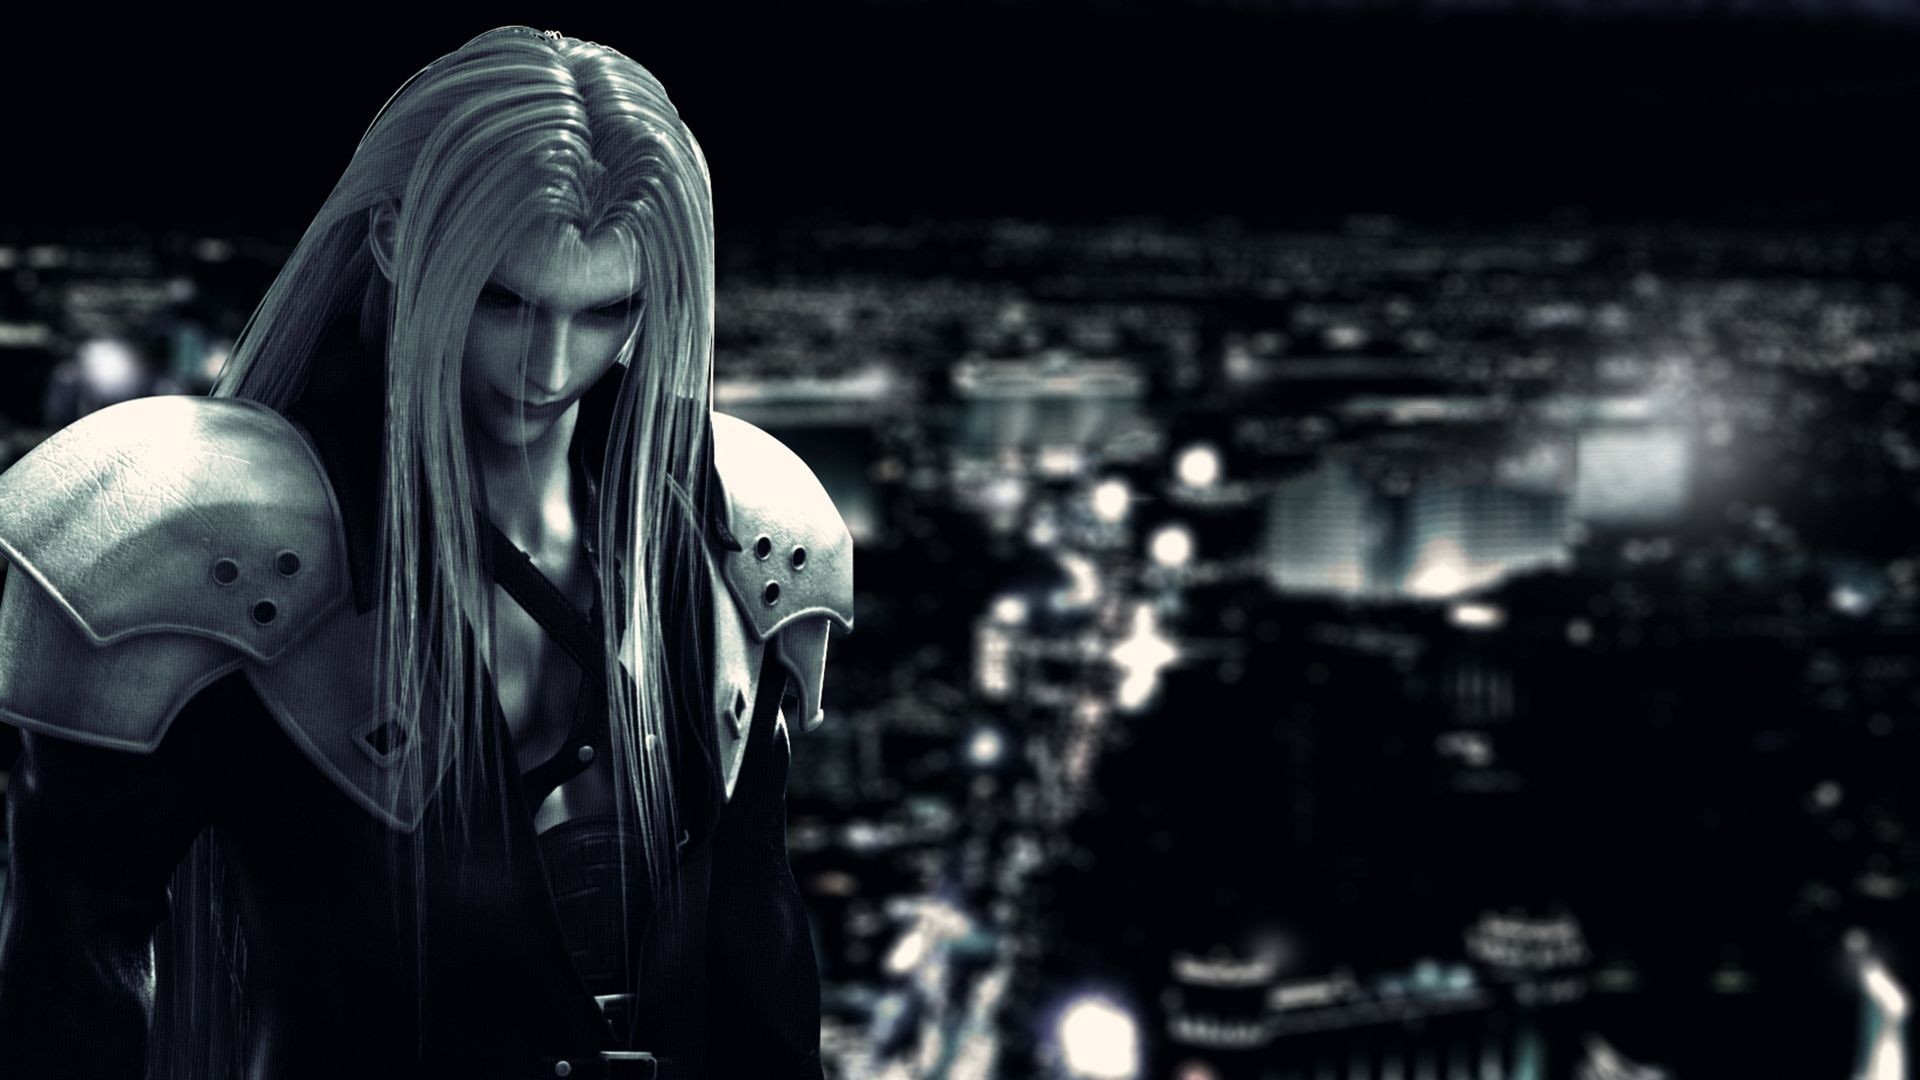 1920x1080 3 Final Fantasy VII: Advent Children HD Wallpapers | Backgrounds .